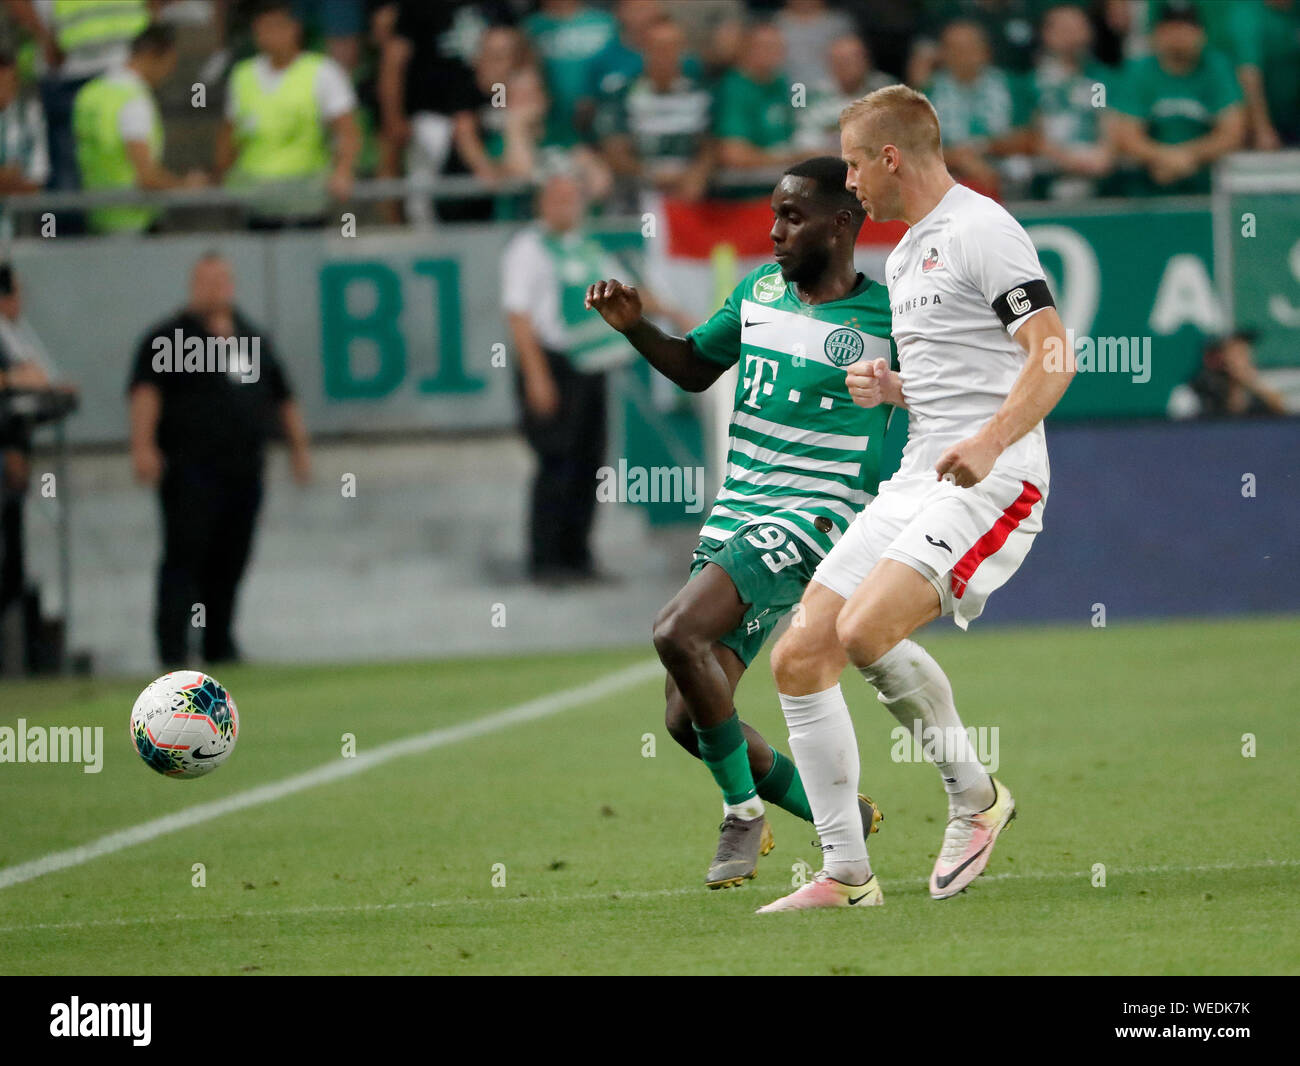 BUDAPEST, HUNGARY - AUGUST 29: (l-r) Tokmac Chol Nguen of Ferencvarosi TC competes for the ball with Algis Jankauskas of FK Suduva during the UEFA Europa League Play-off Second Leg match between Ferencvarosi TC and FK Suduva at Ferencvaros Stadium on August 29, 2019 in Budapest, Hungary. Stock Photo